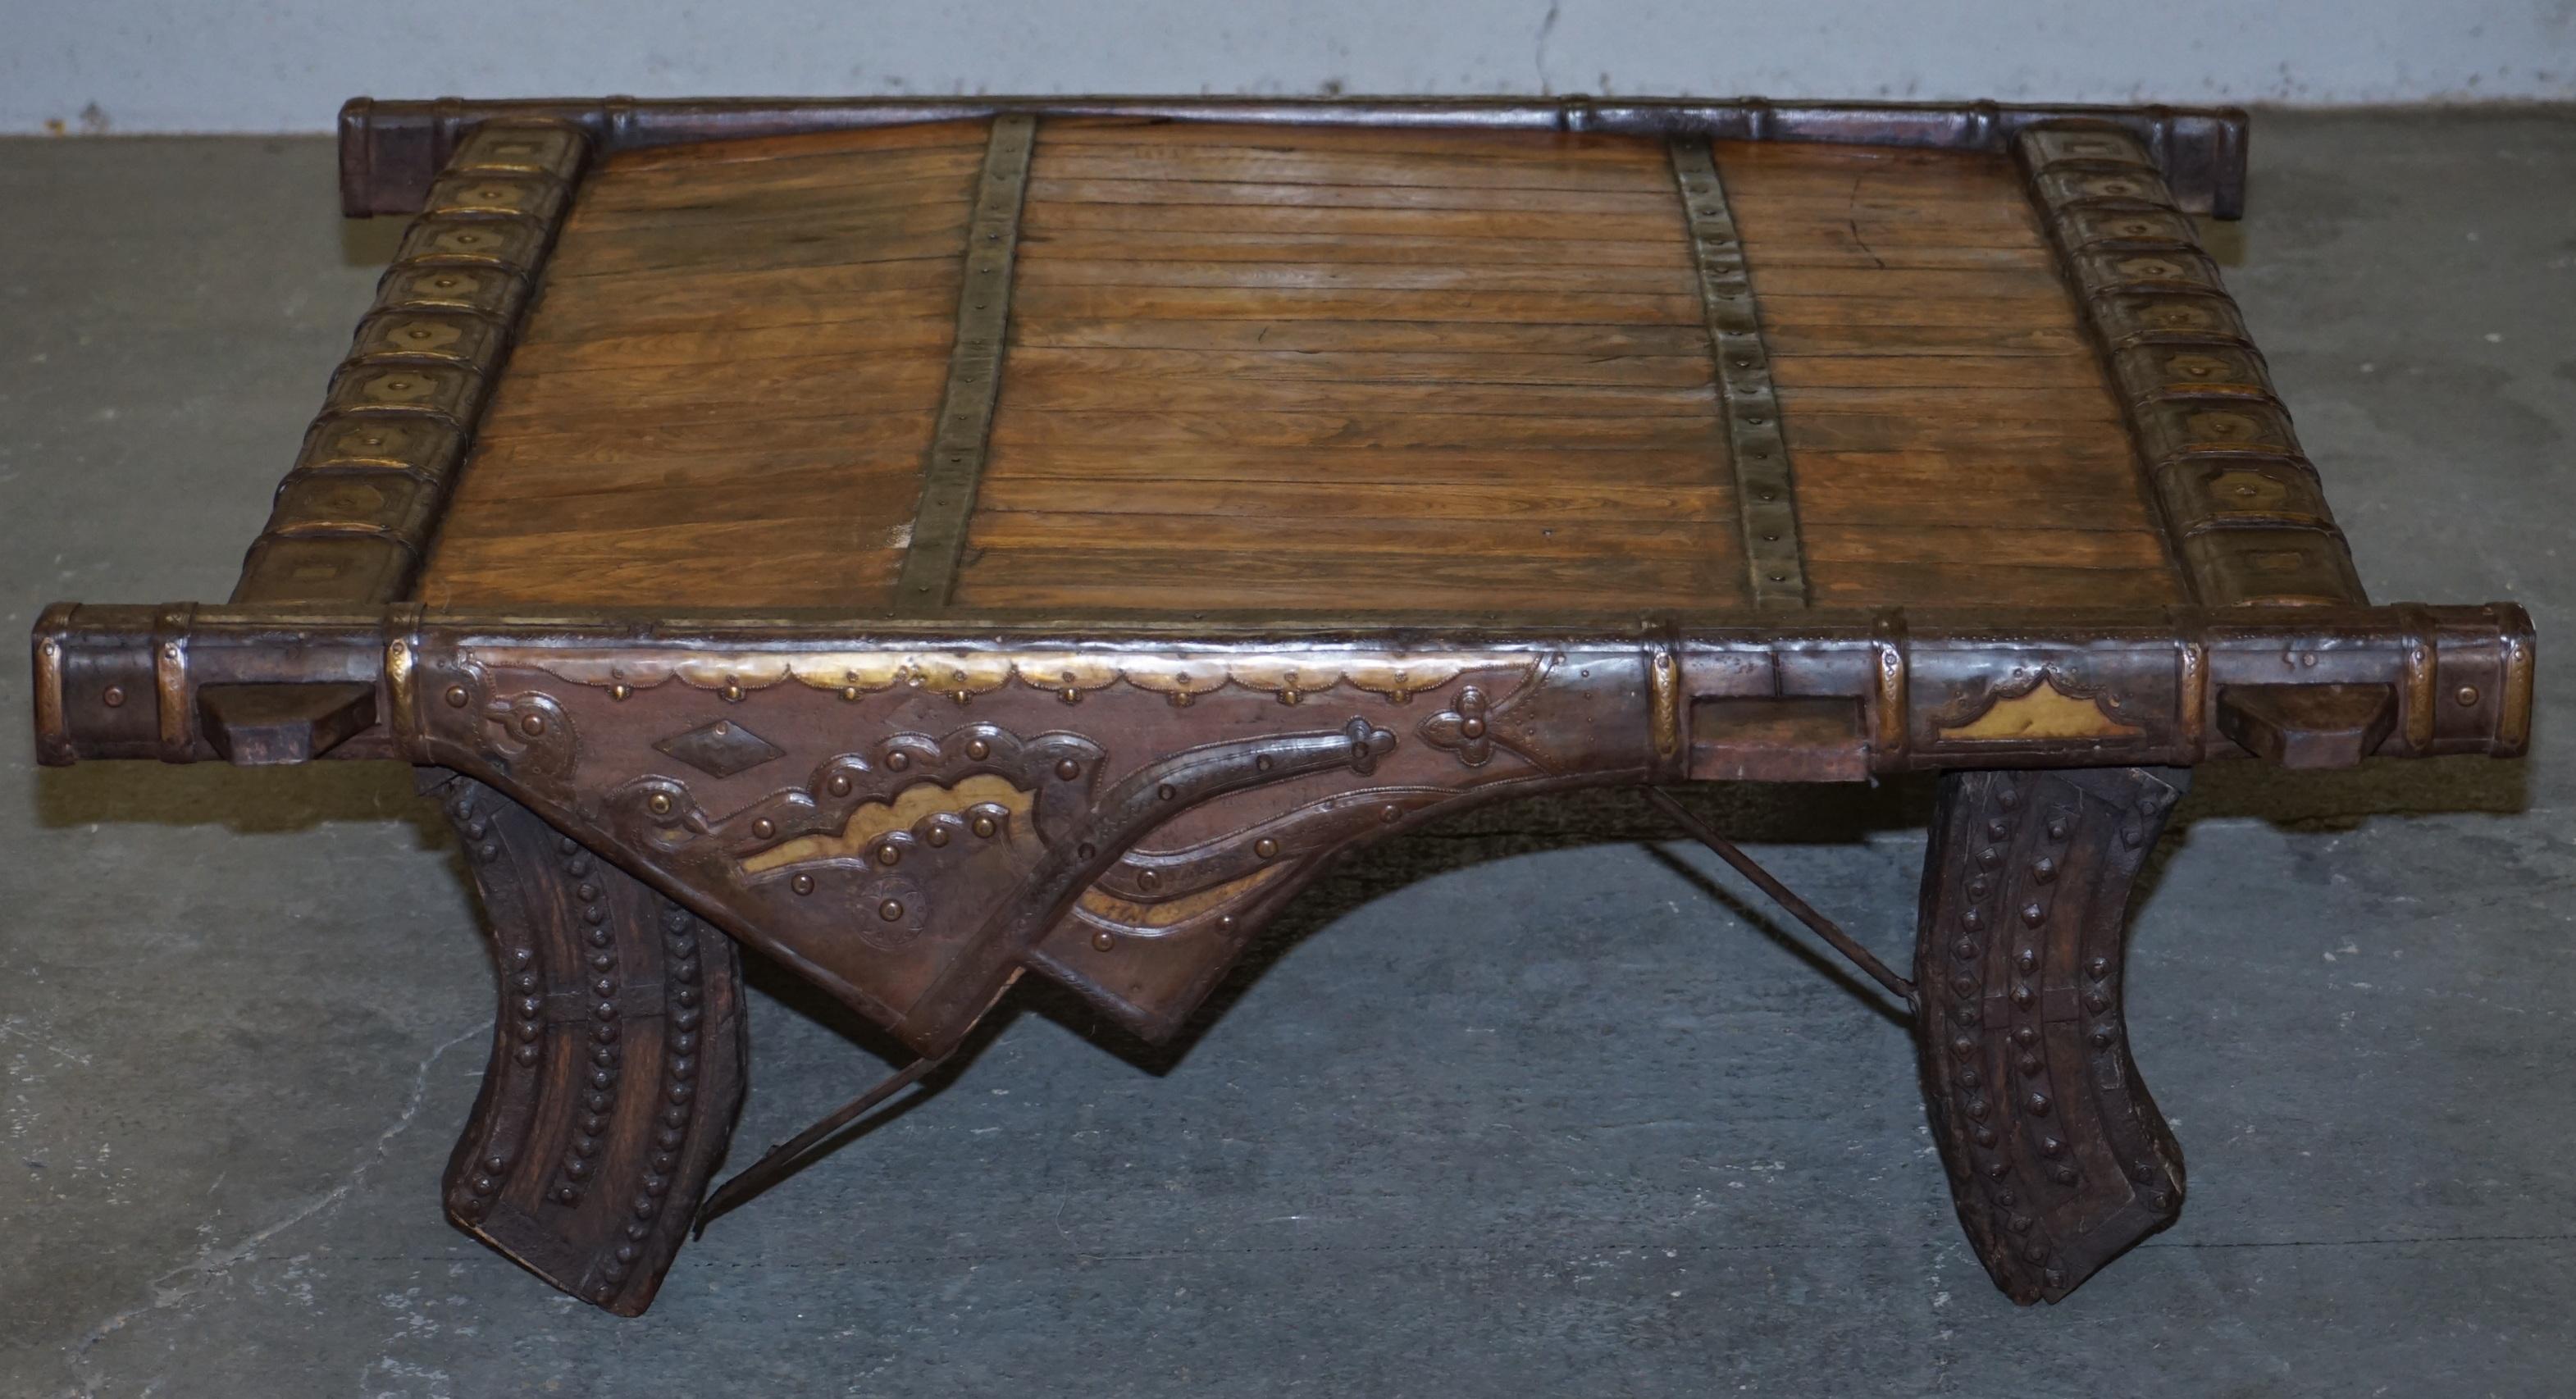 Royal House Antiques is delighted to offer for sale this stunning original Antique Tibetan Camel or Ox Cart which has been reclaimed to be used as a large coffee table.

A very good looking well made and decorative piece of art furniture, it was